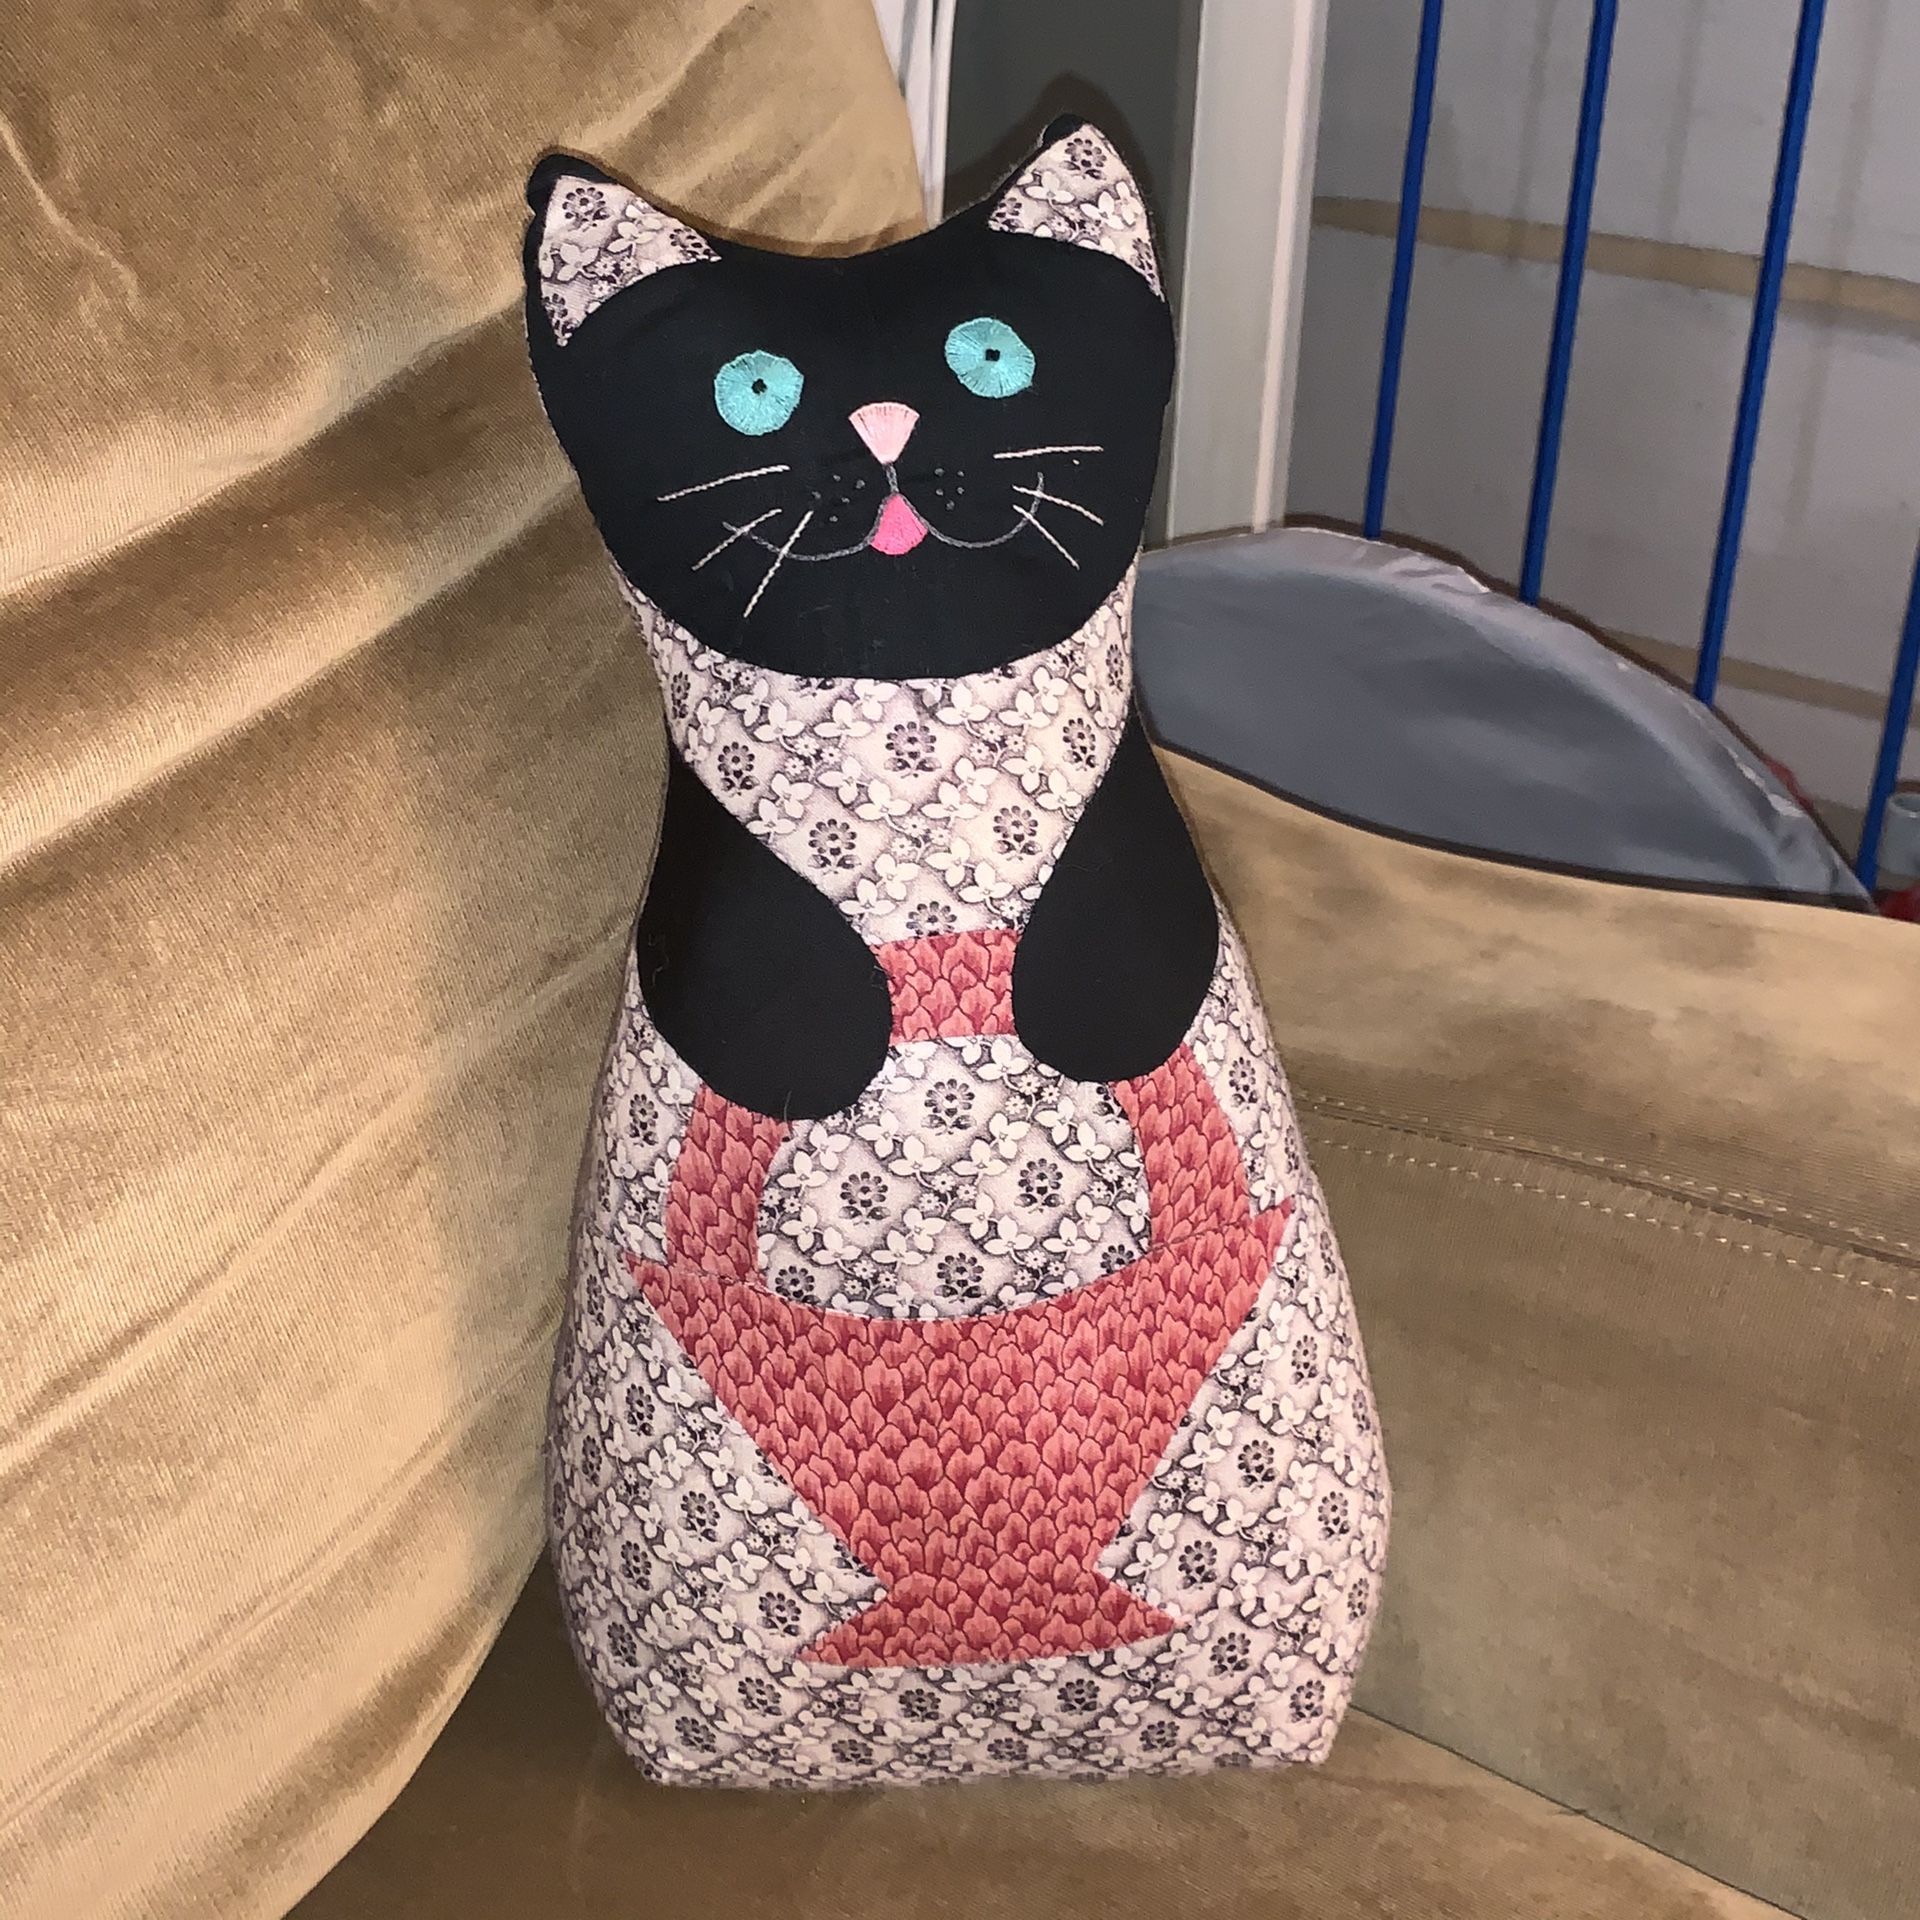 Patchwork cat doll